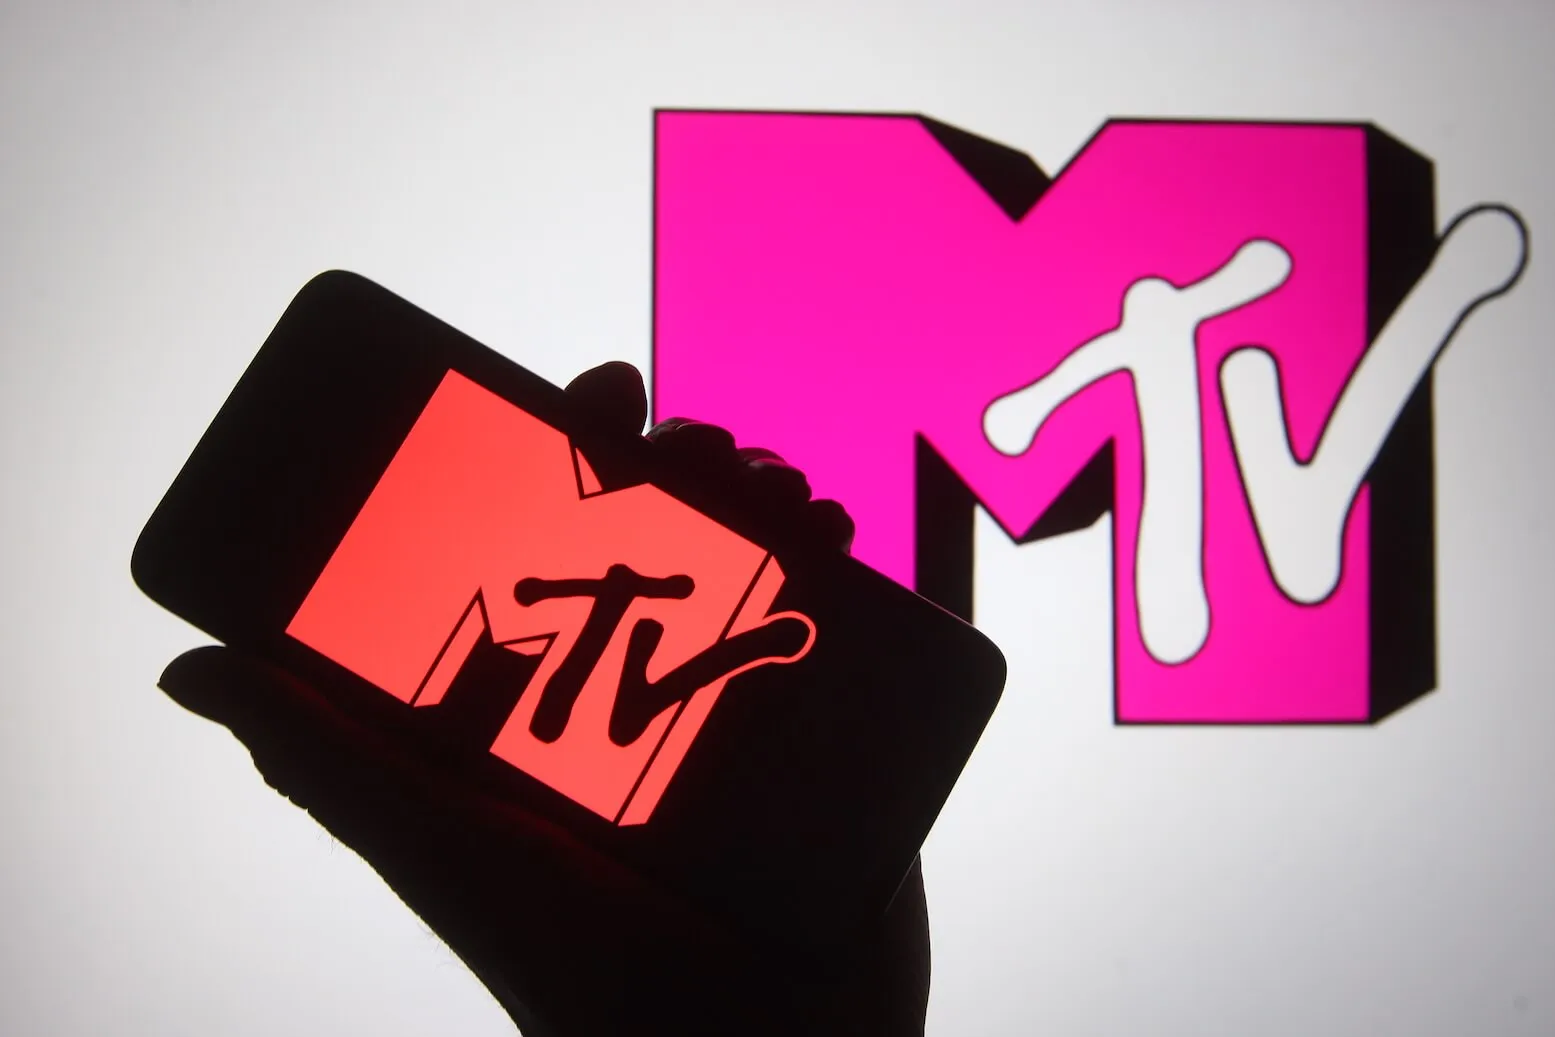 A silhouette hand is seen holding a smartphone with the MTV channel logo on its screen. Another MTV logo is behind it.